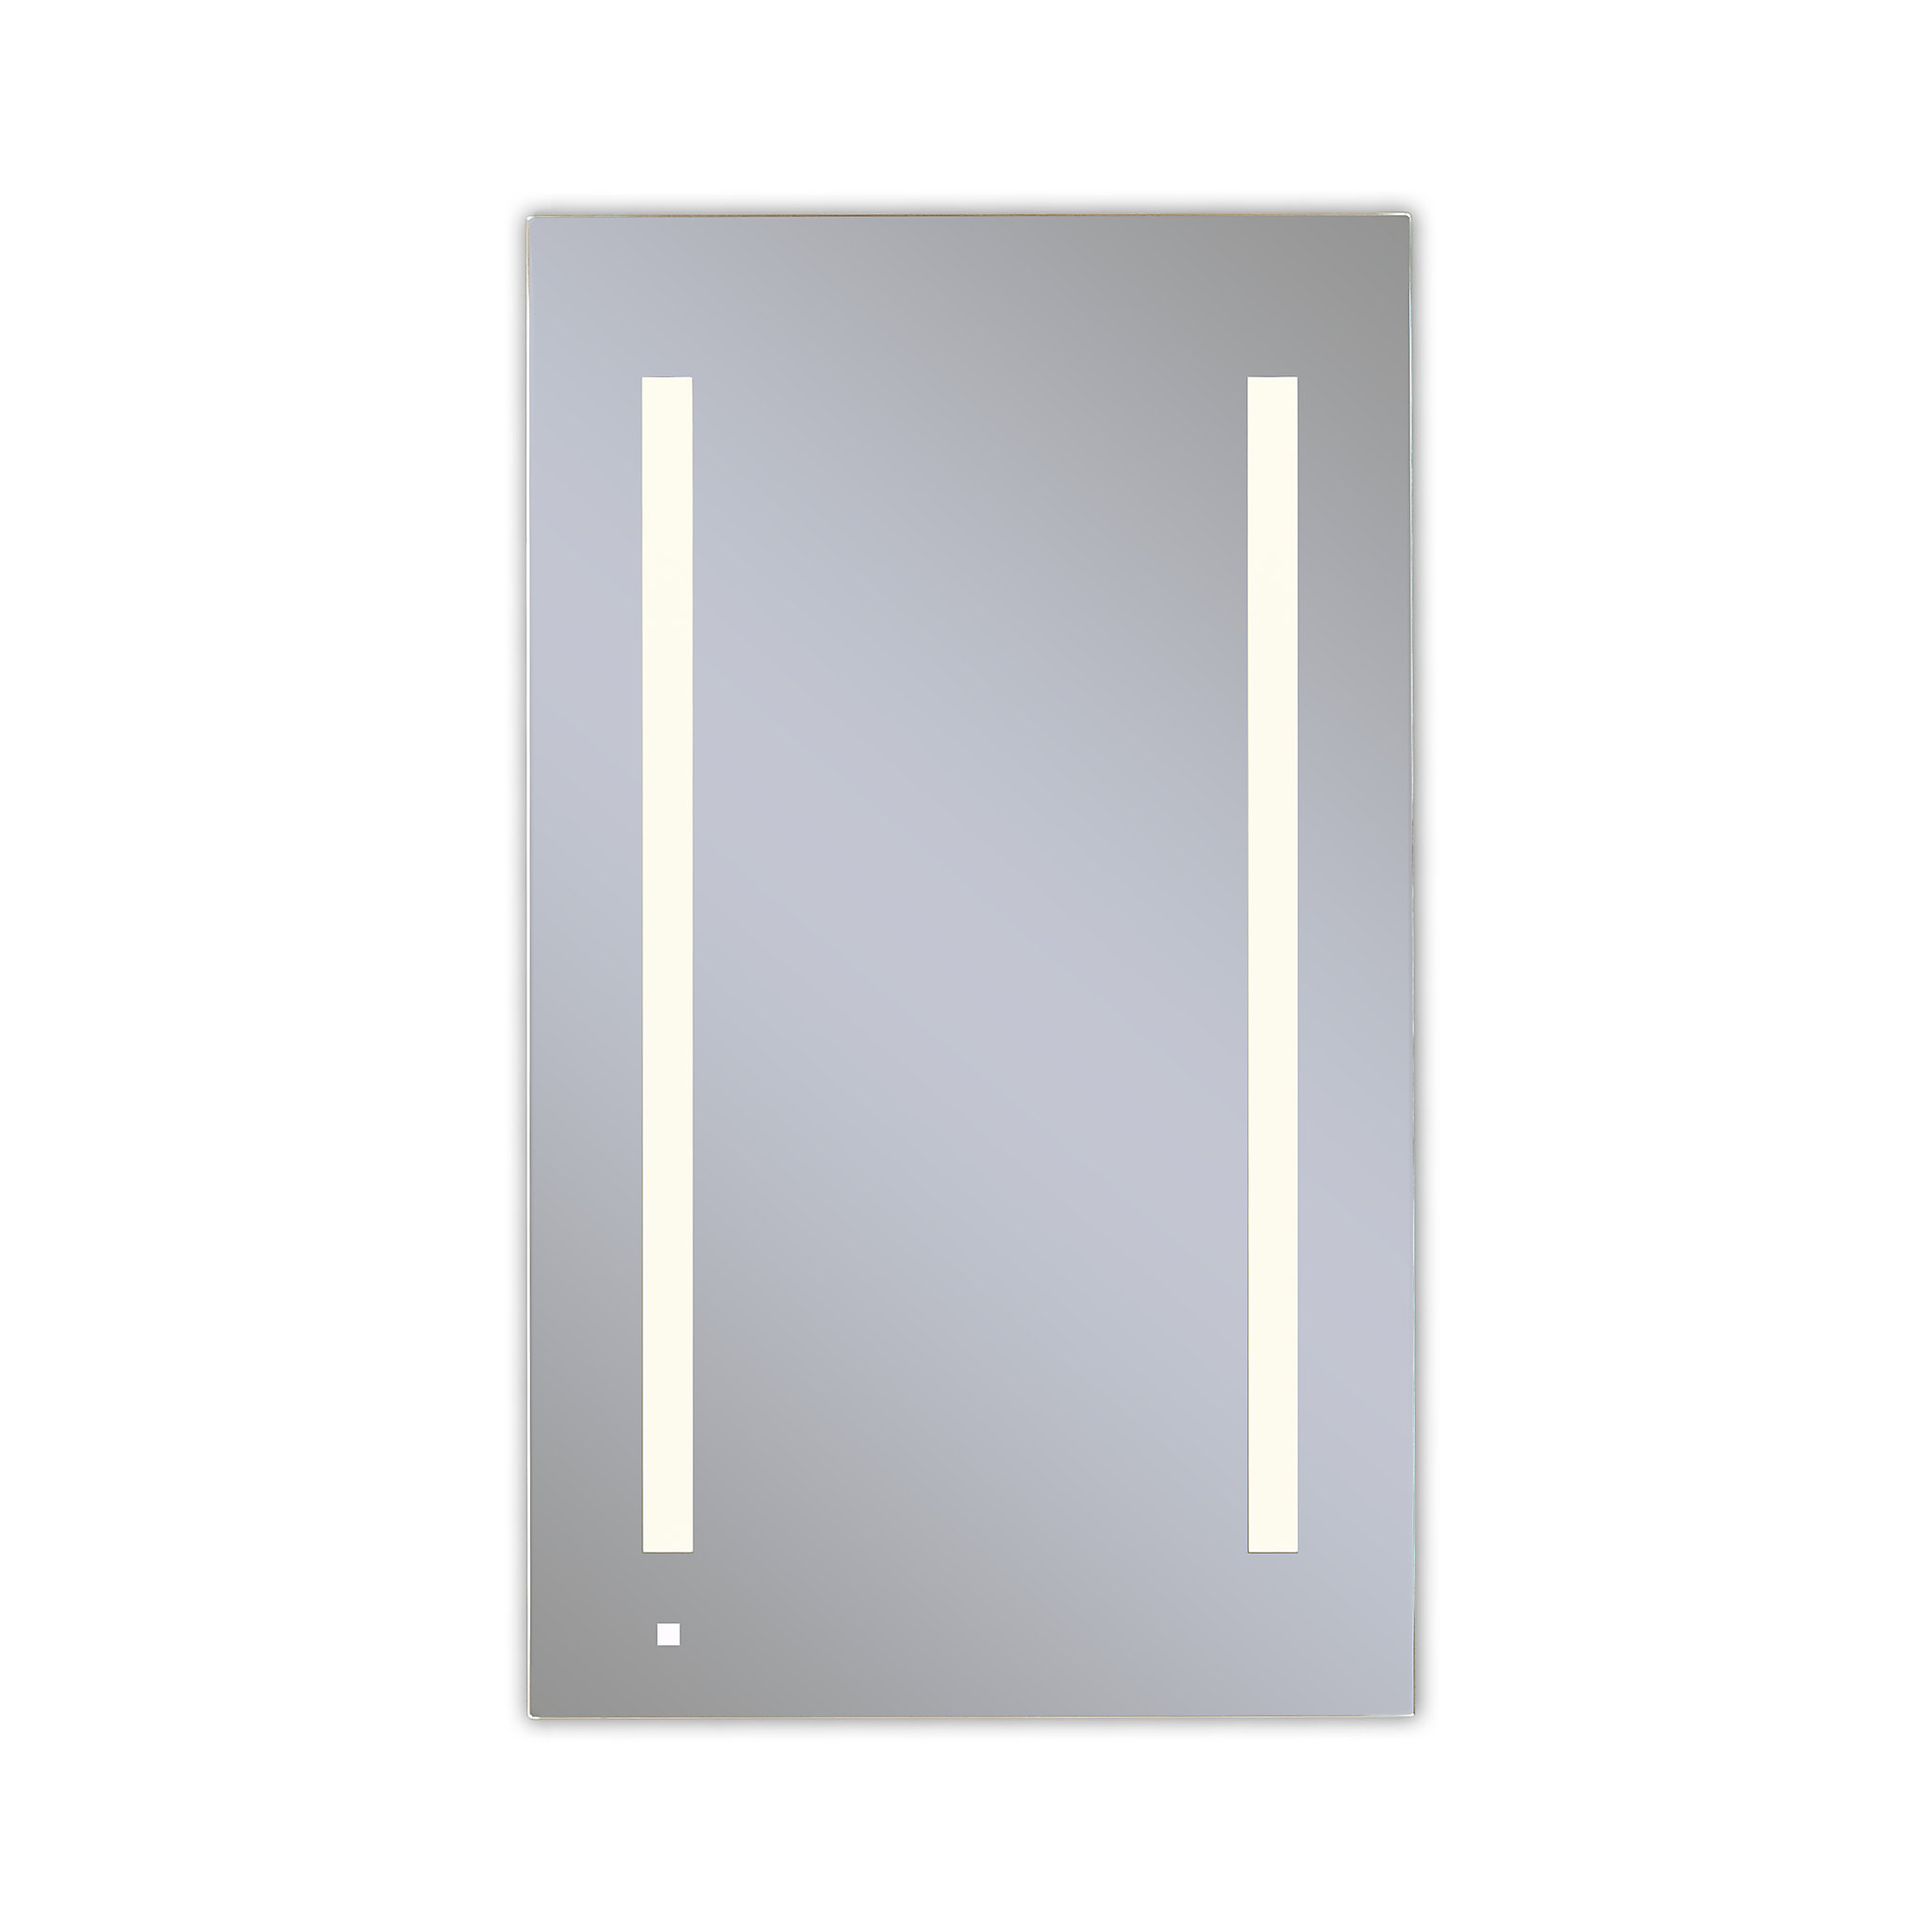 Robern AC2440D4P1RW AiO Lighted Cabinet, 24" x 40" x 4", LUM Lighting, 2700K Temperature (Warm Light), Dimmable, Electrical Outl